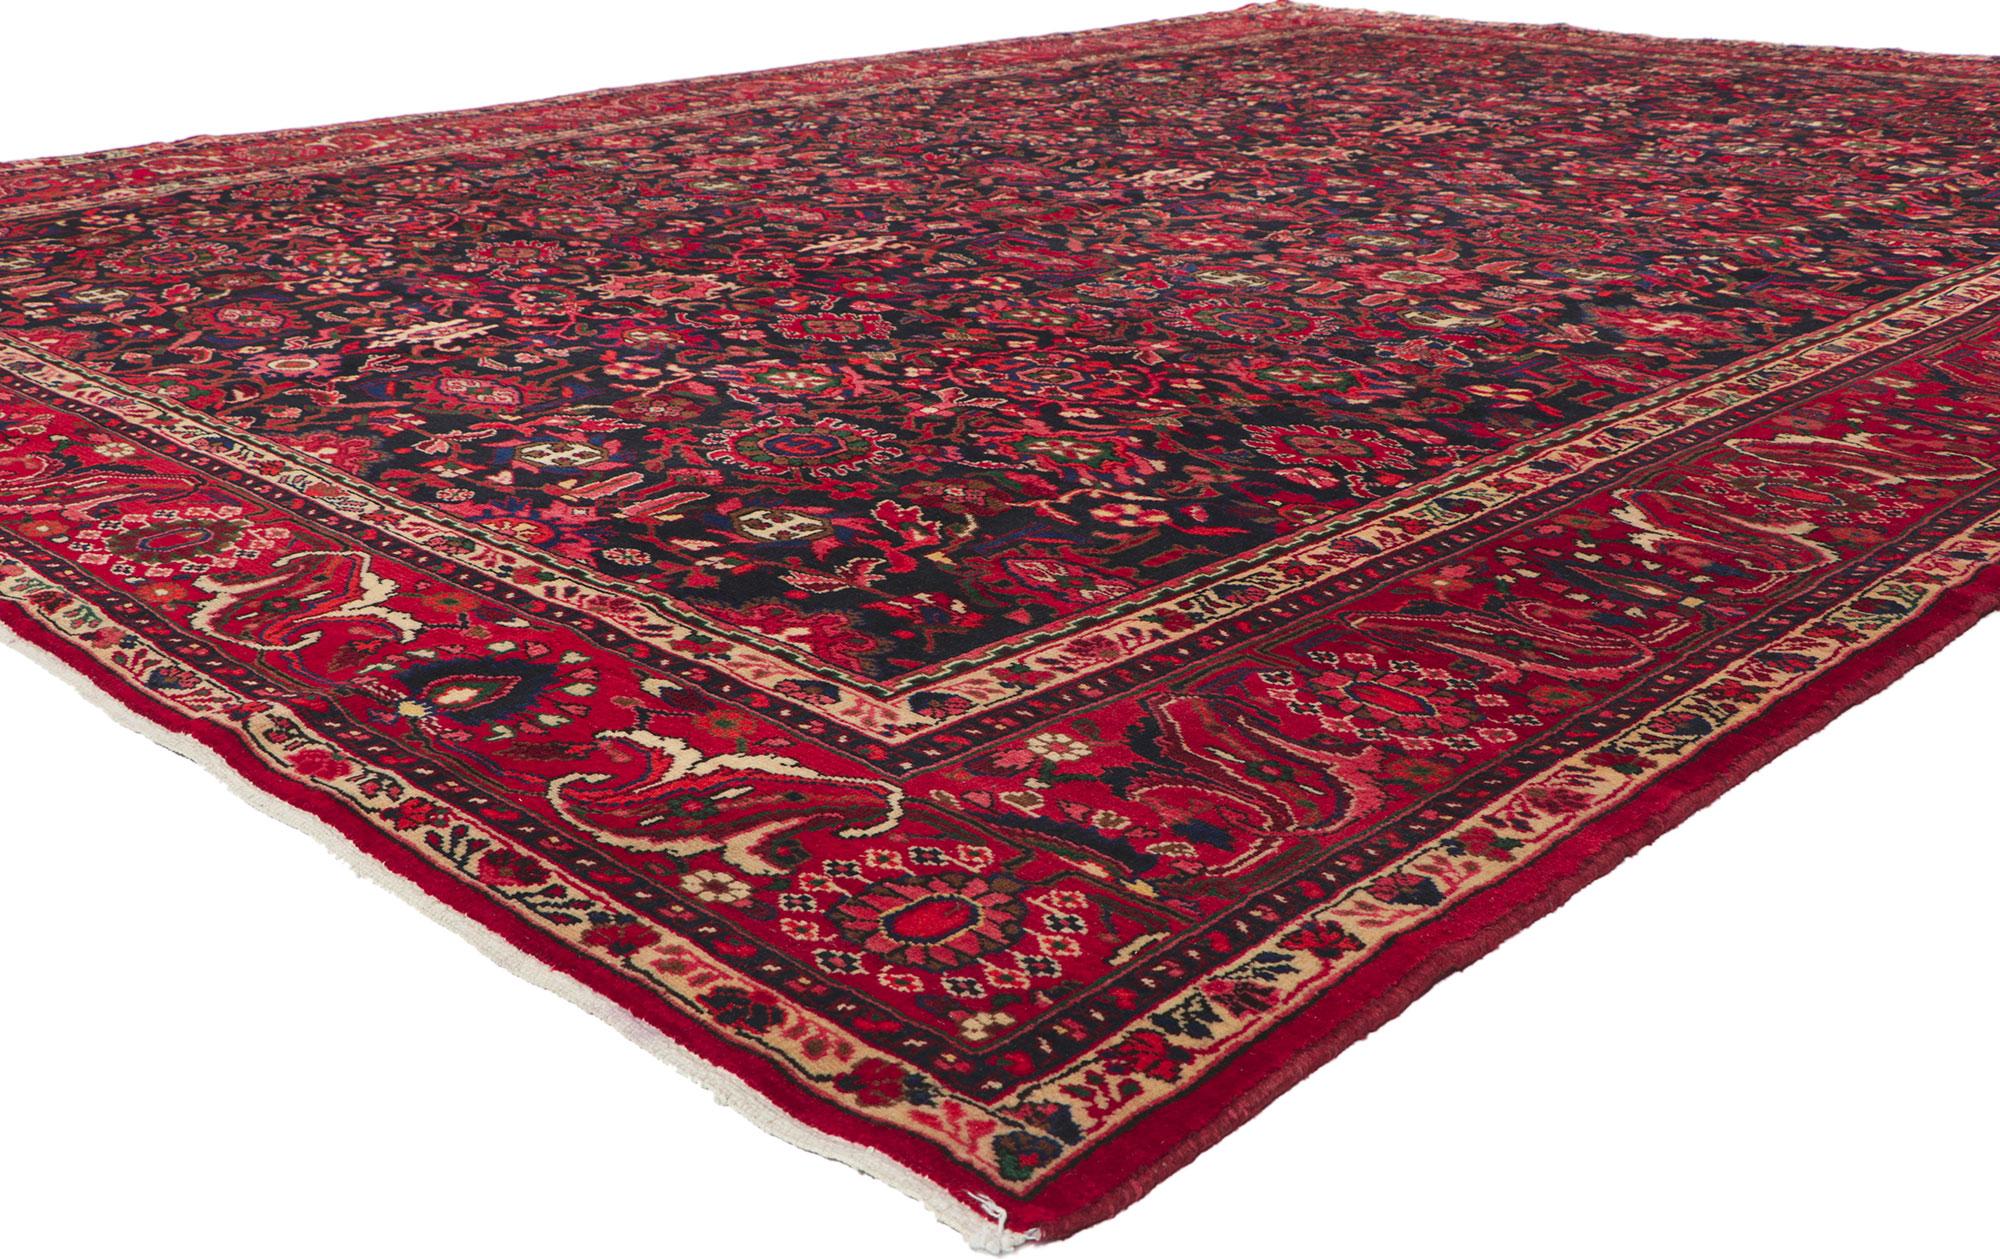 61203 vintage Persian Malayer rug 10'03 x 13'09. Eminating a timeless design and beguiling beauty in saturated colors, this hand-knotted wool antique Persian Malayer rug is poised to impress. An allover repeating botanical pattern spread across the